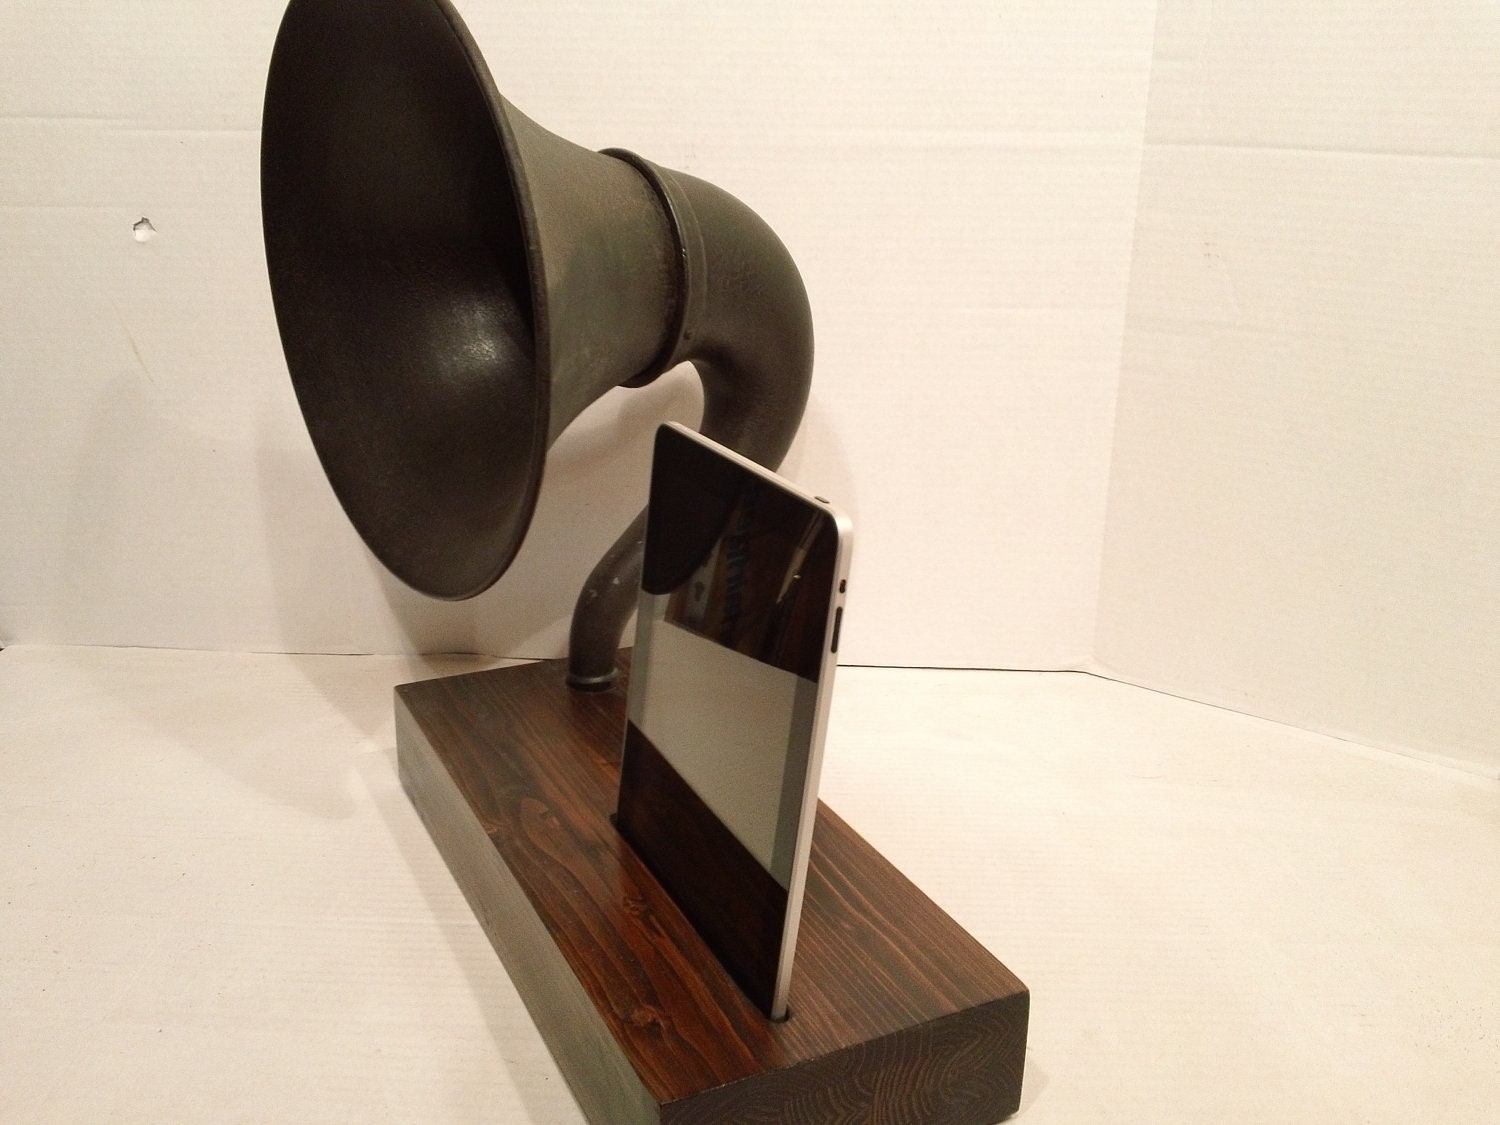 Acoustic  iPad Speaker Dock Utilizing an Antique 14in Atwater Kent Gramophone -Ready to ship in one week- - ReAcoustic